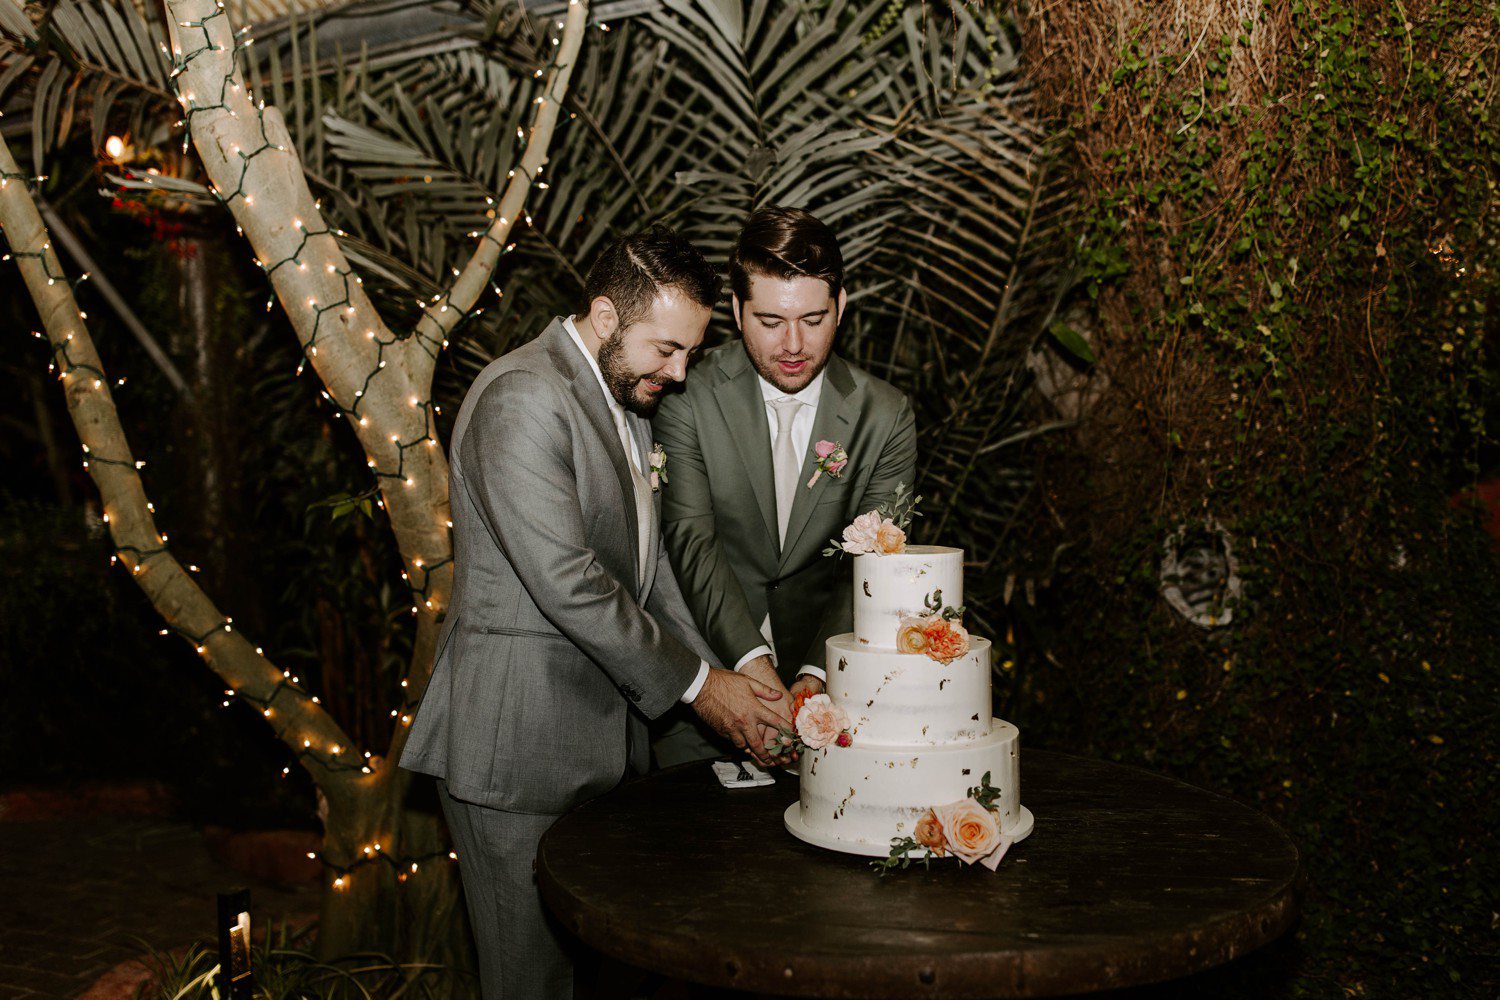 Grooms cutting wedding cake together.